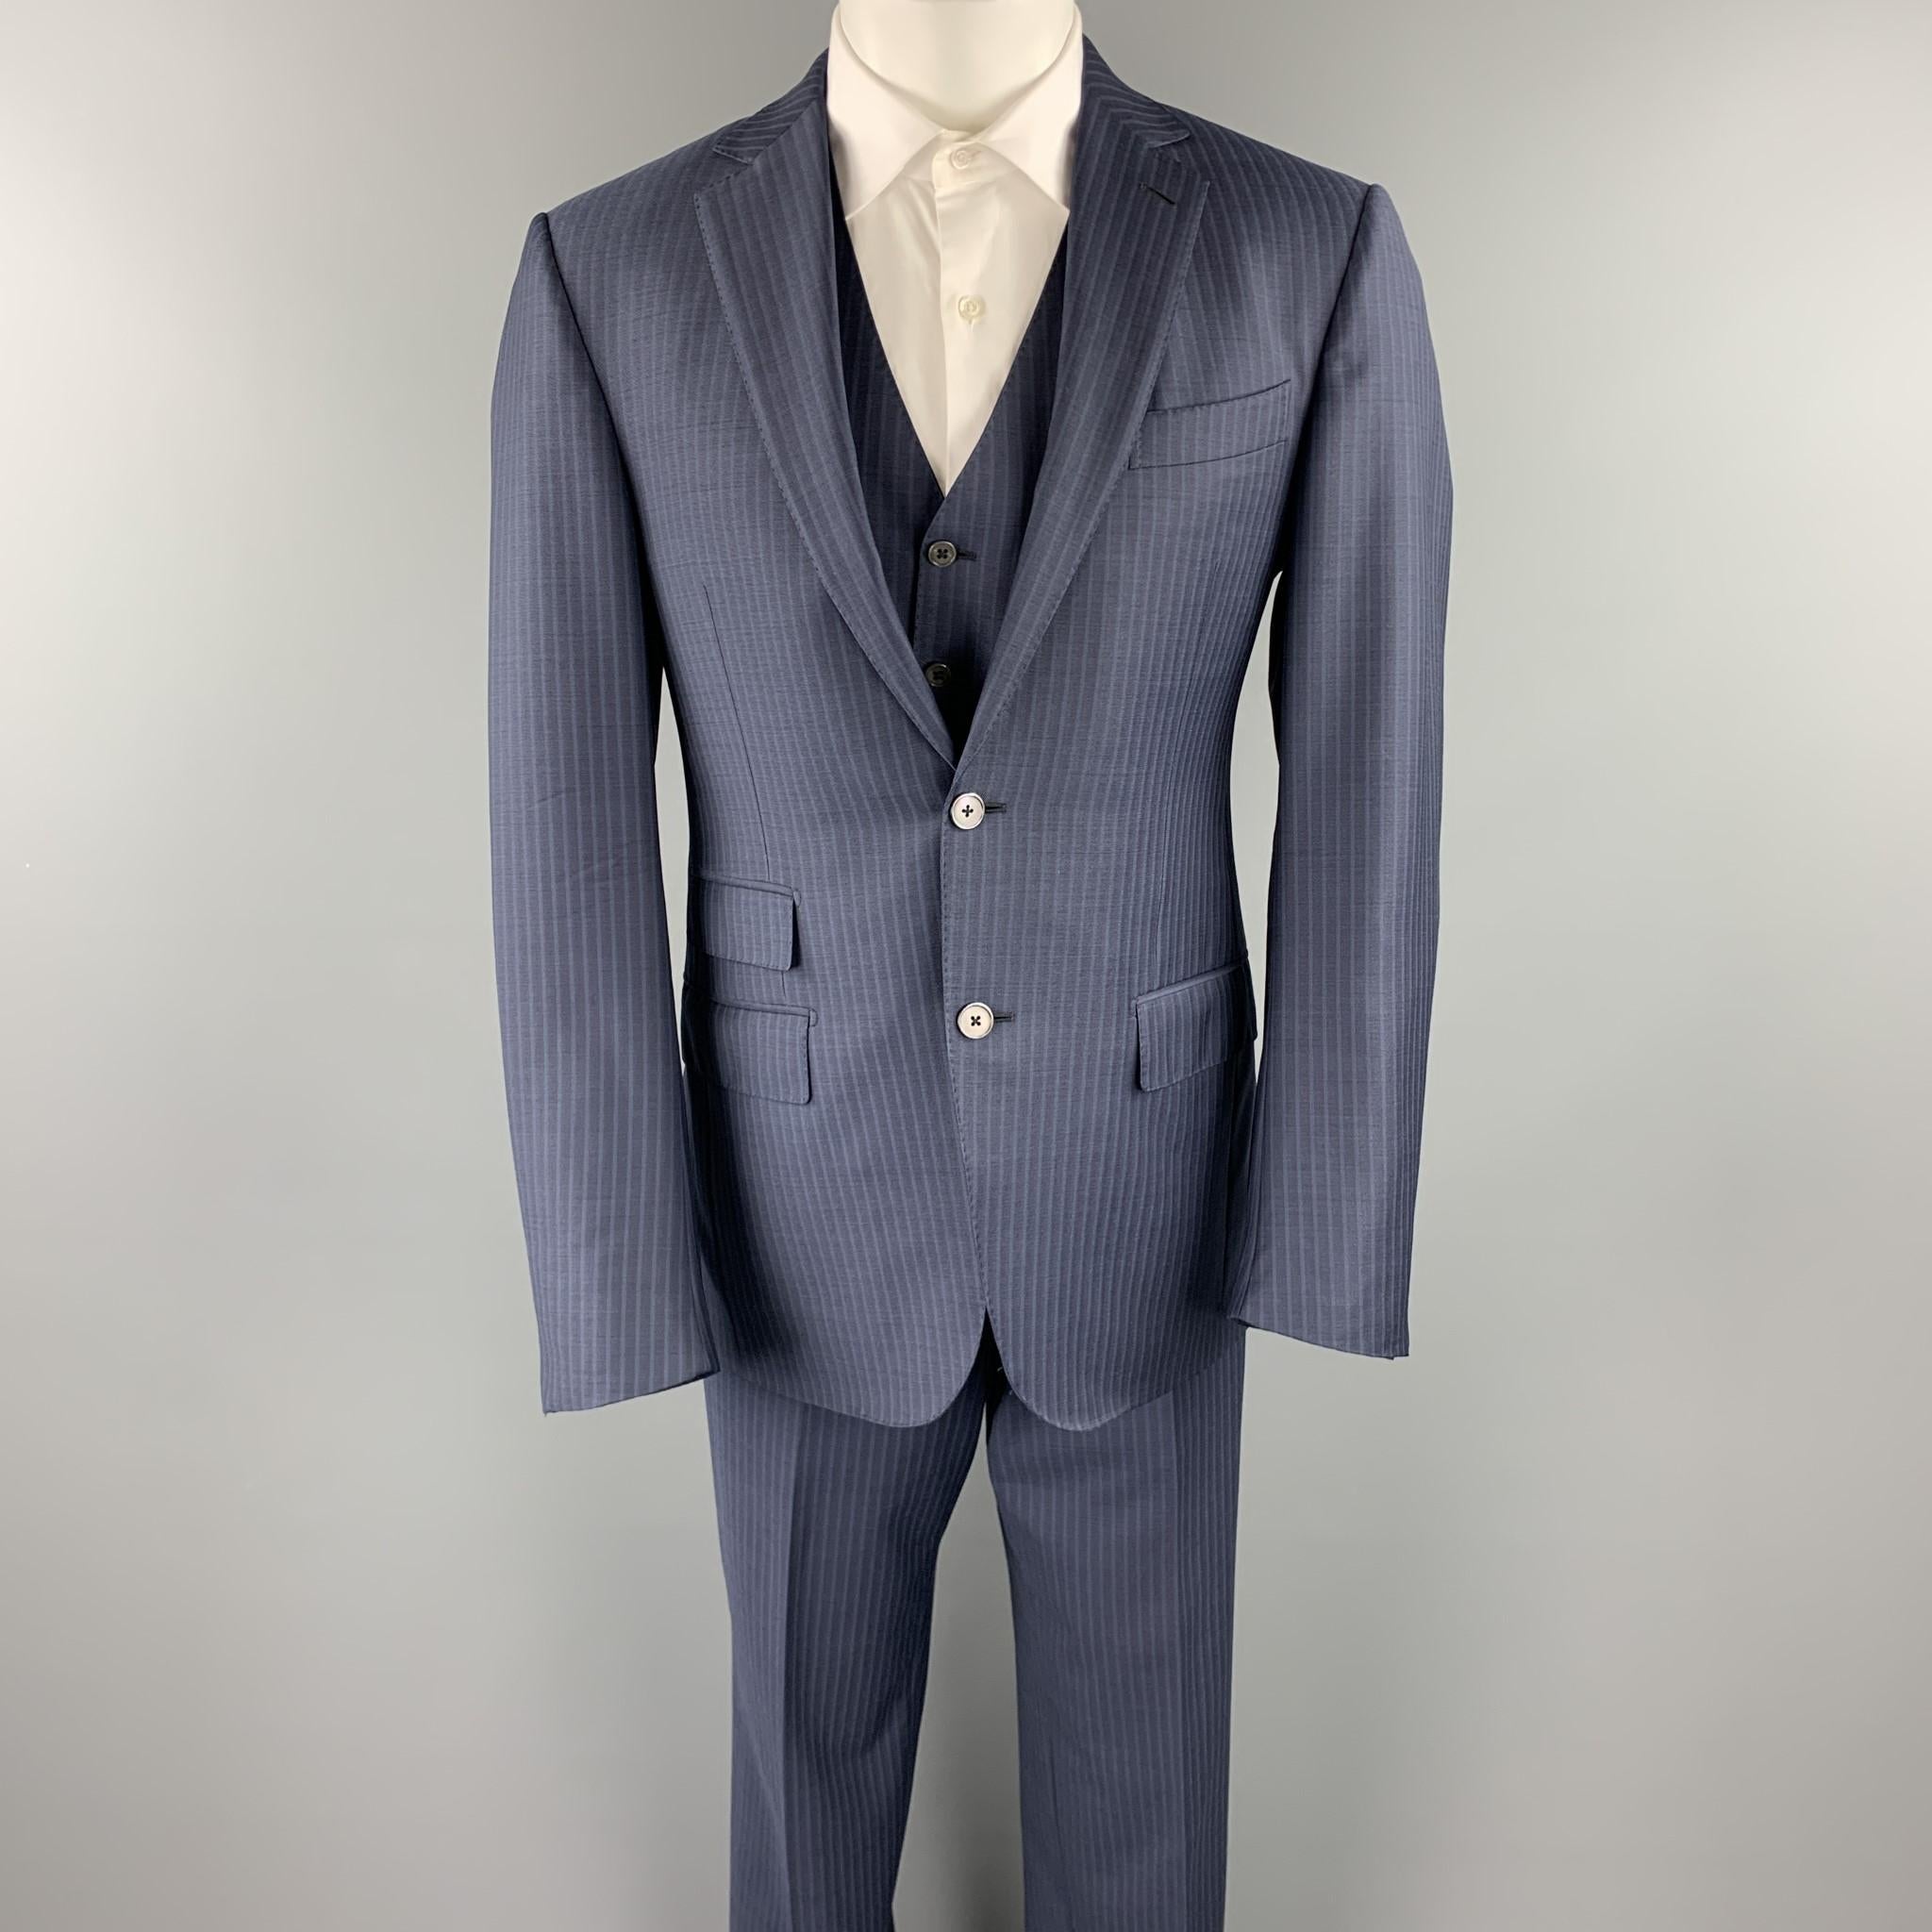 ERMENEGILDO ZEGNA 3 Piece suit comes in a navy stripe wool and includes a single breasted, two button sport coat with a notch lapel and pleated front trousers. Made to measure. Made in Switzerland.

Excellent Pre-Owned Condition.
Marked: 50